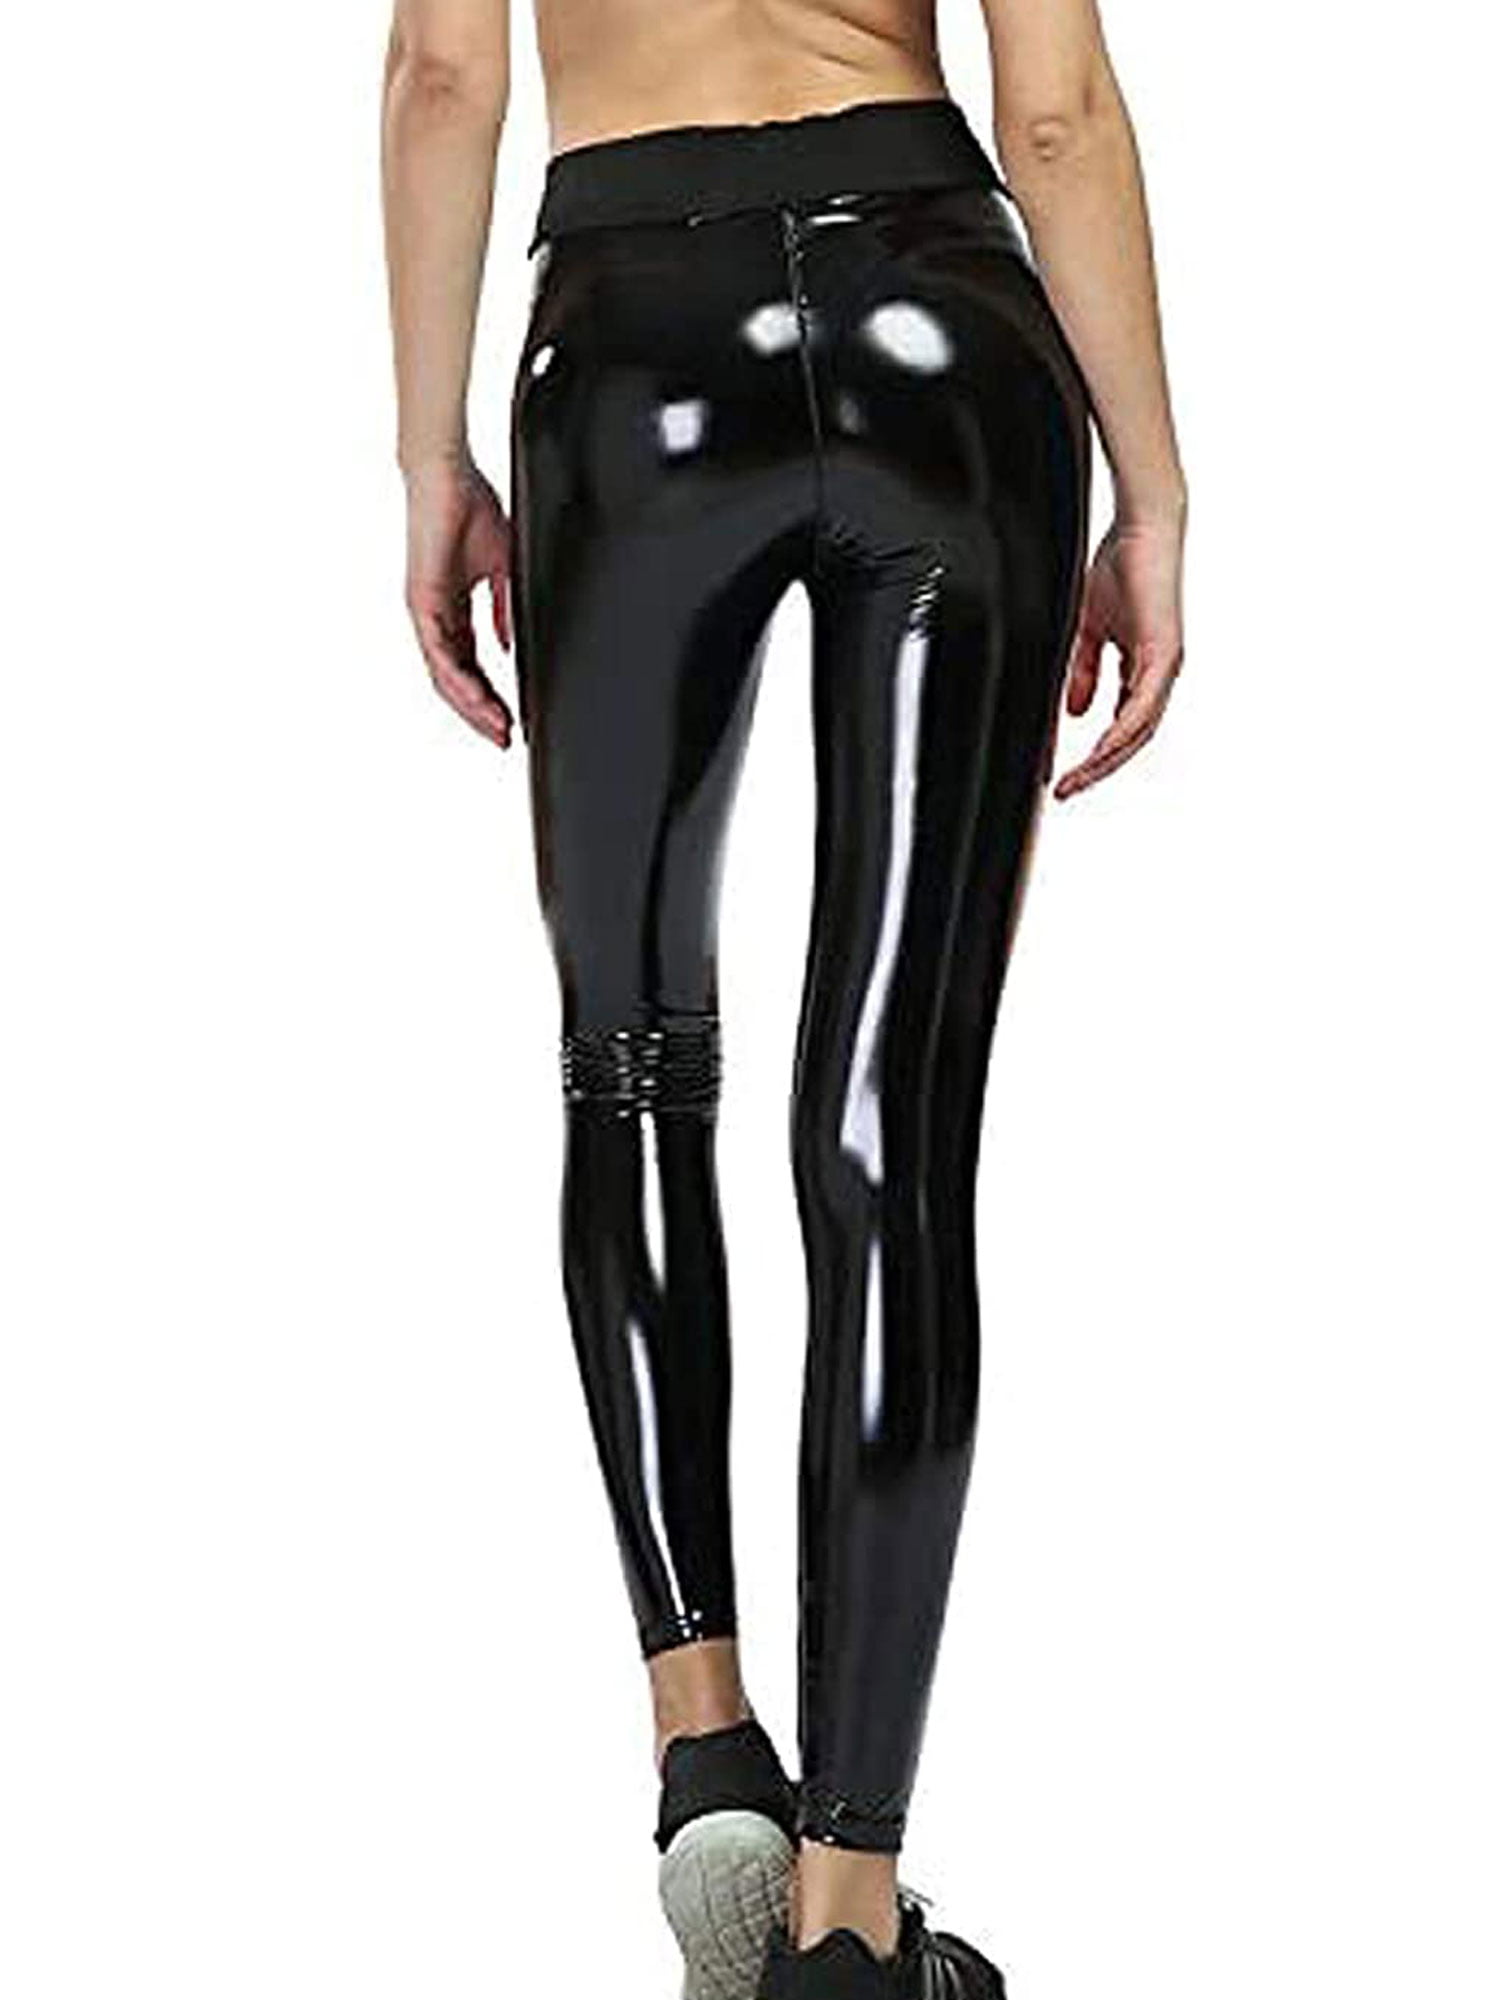 luethbiezx Faux Leather Leggings Pants Stretchy High Waisted Wet Look Tights  for Women 